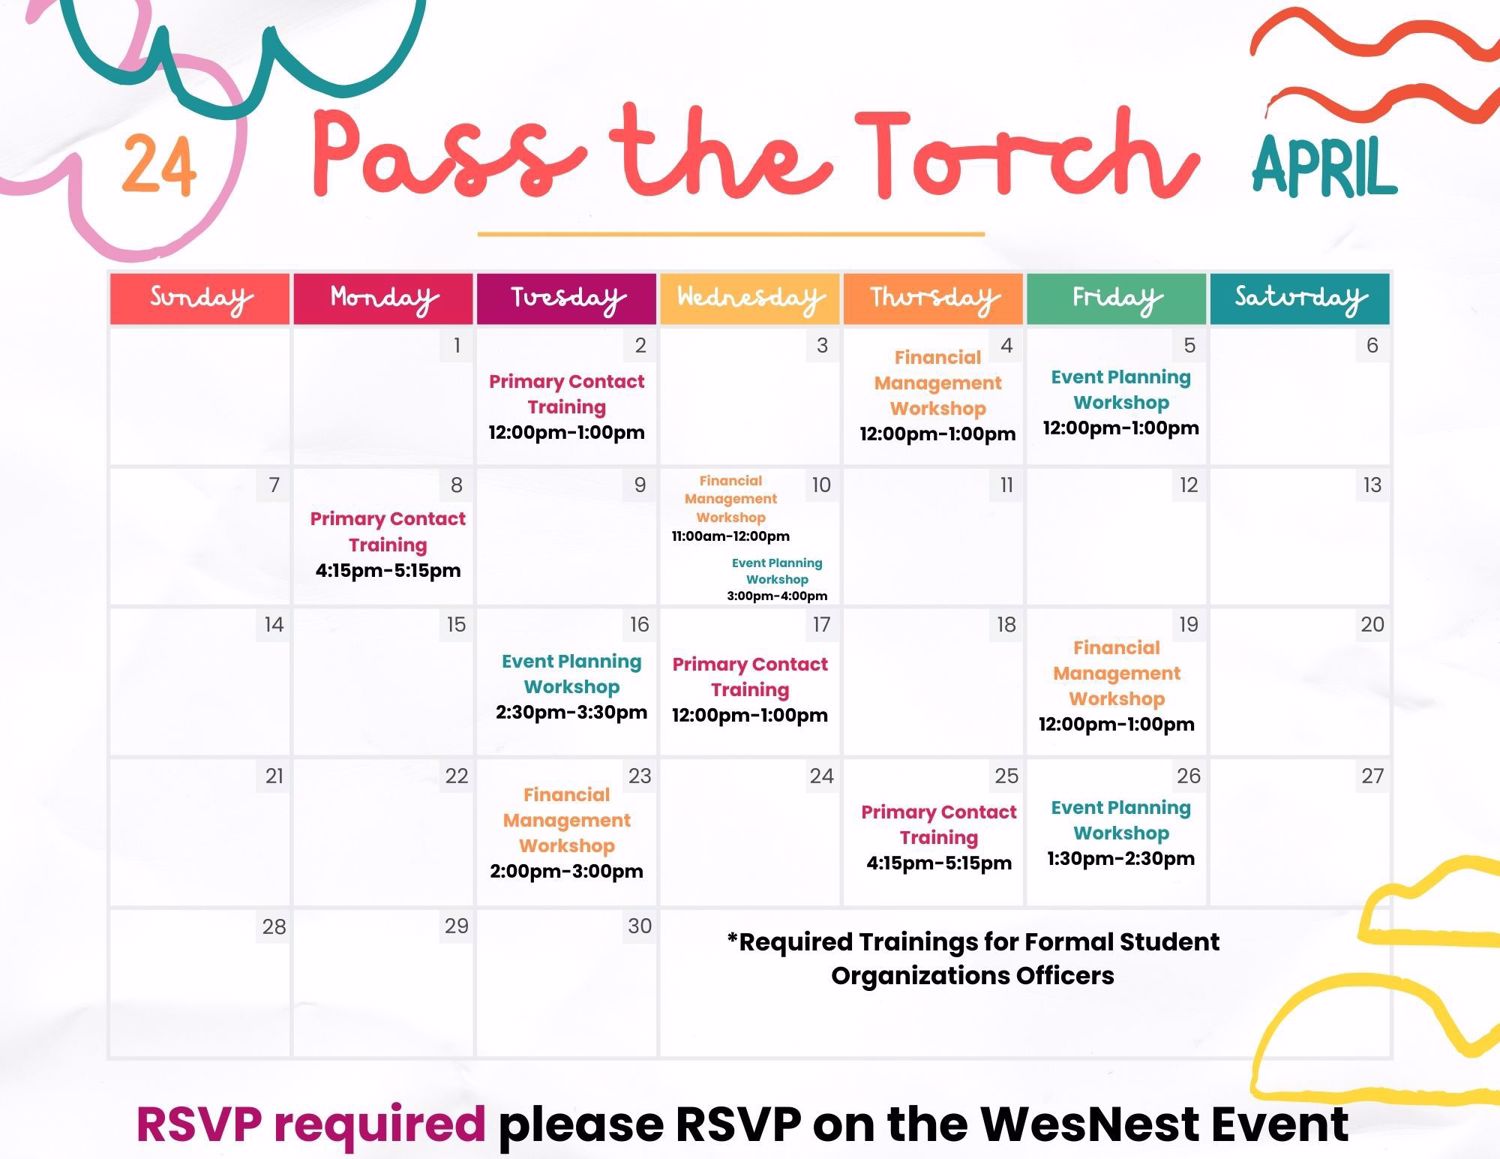 Calendar of Pass The Torch workshops for April